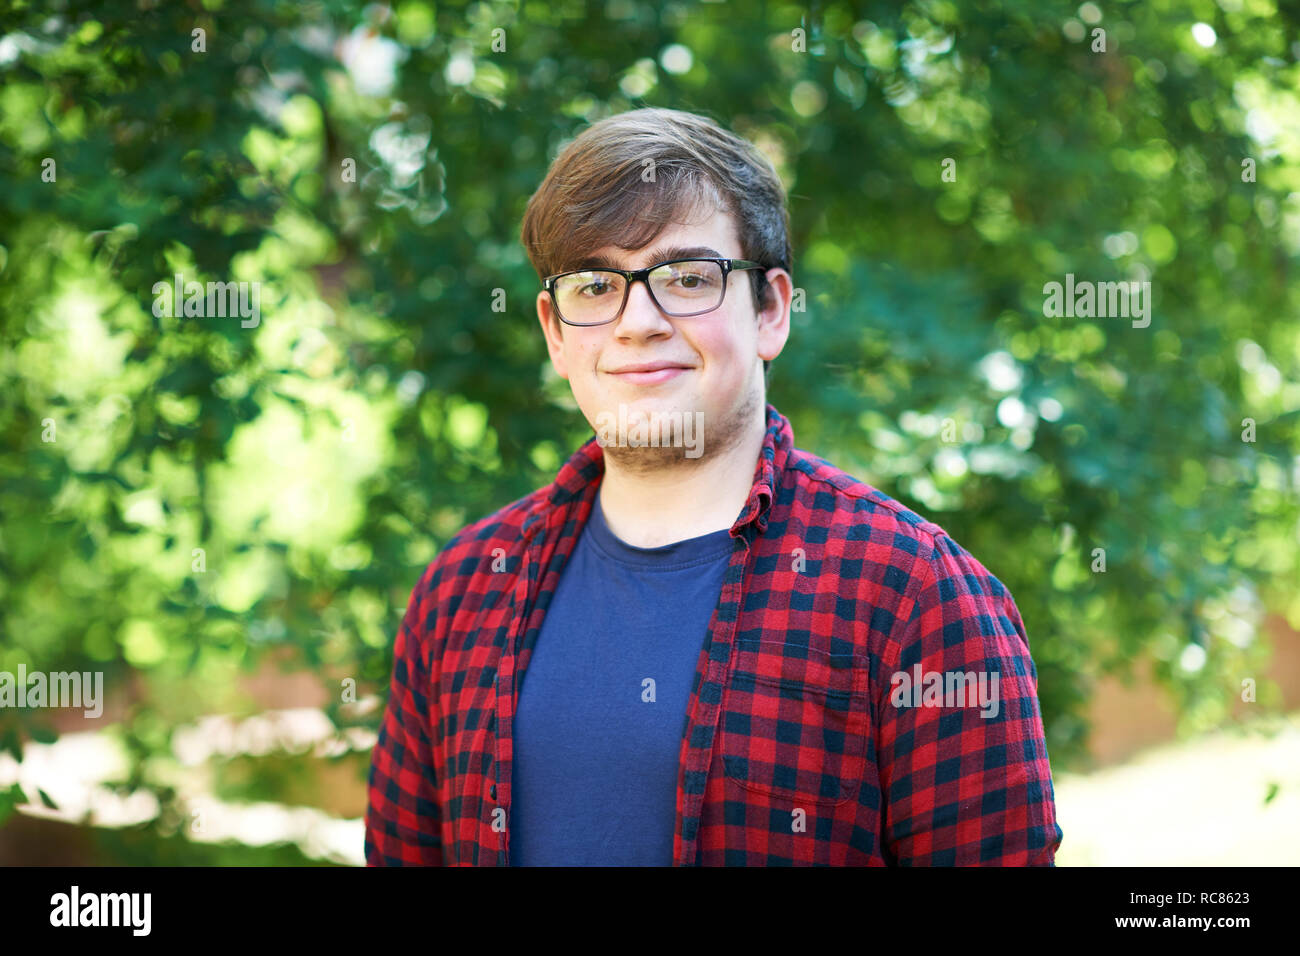 Young male higher education student on college campus, portrait Stock Photo